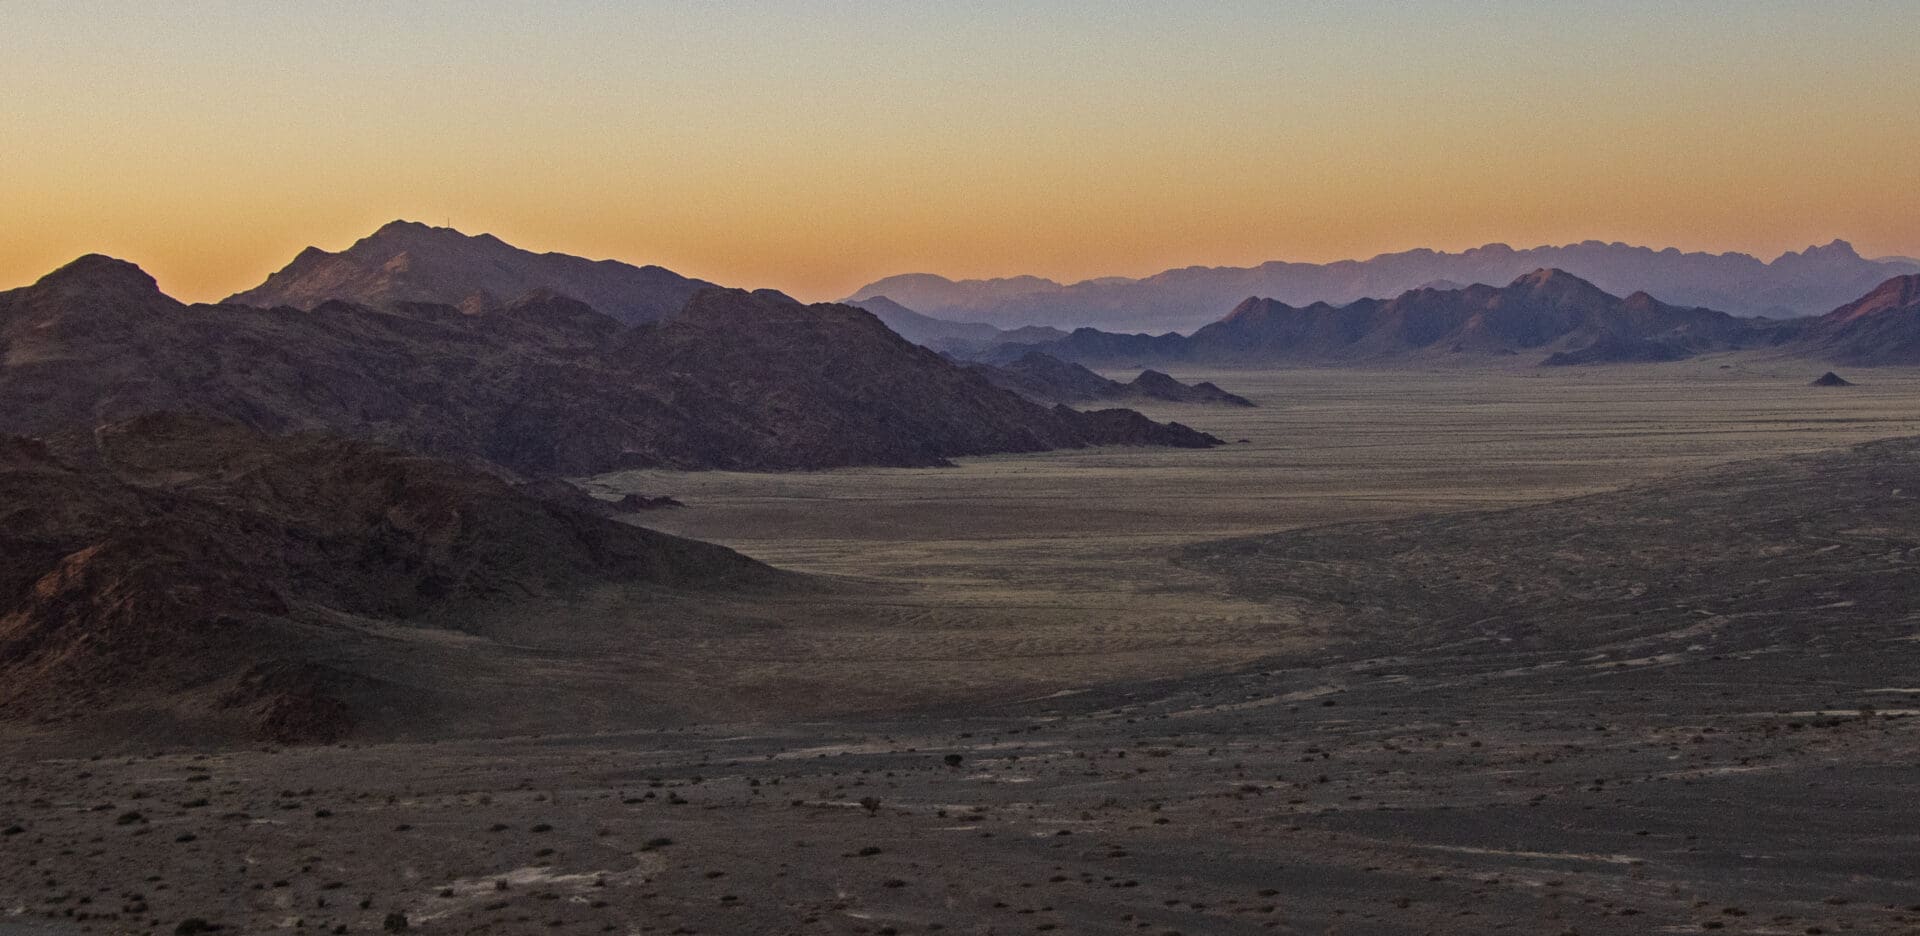 A desert landscape at sunset with mountains in the background.